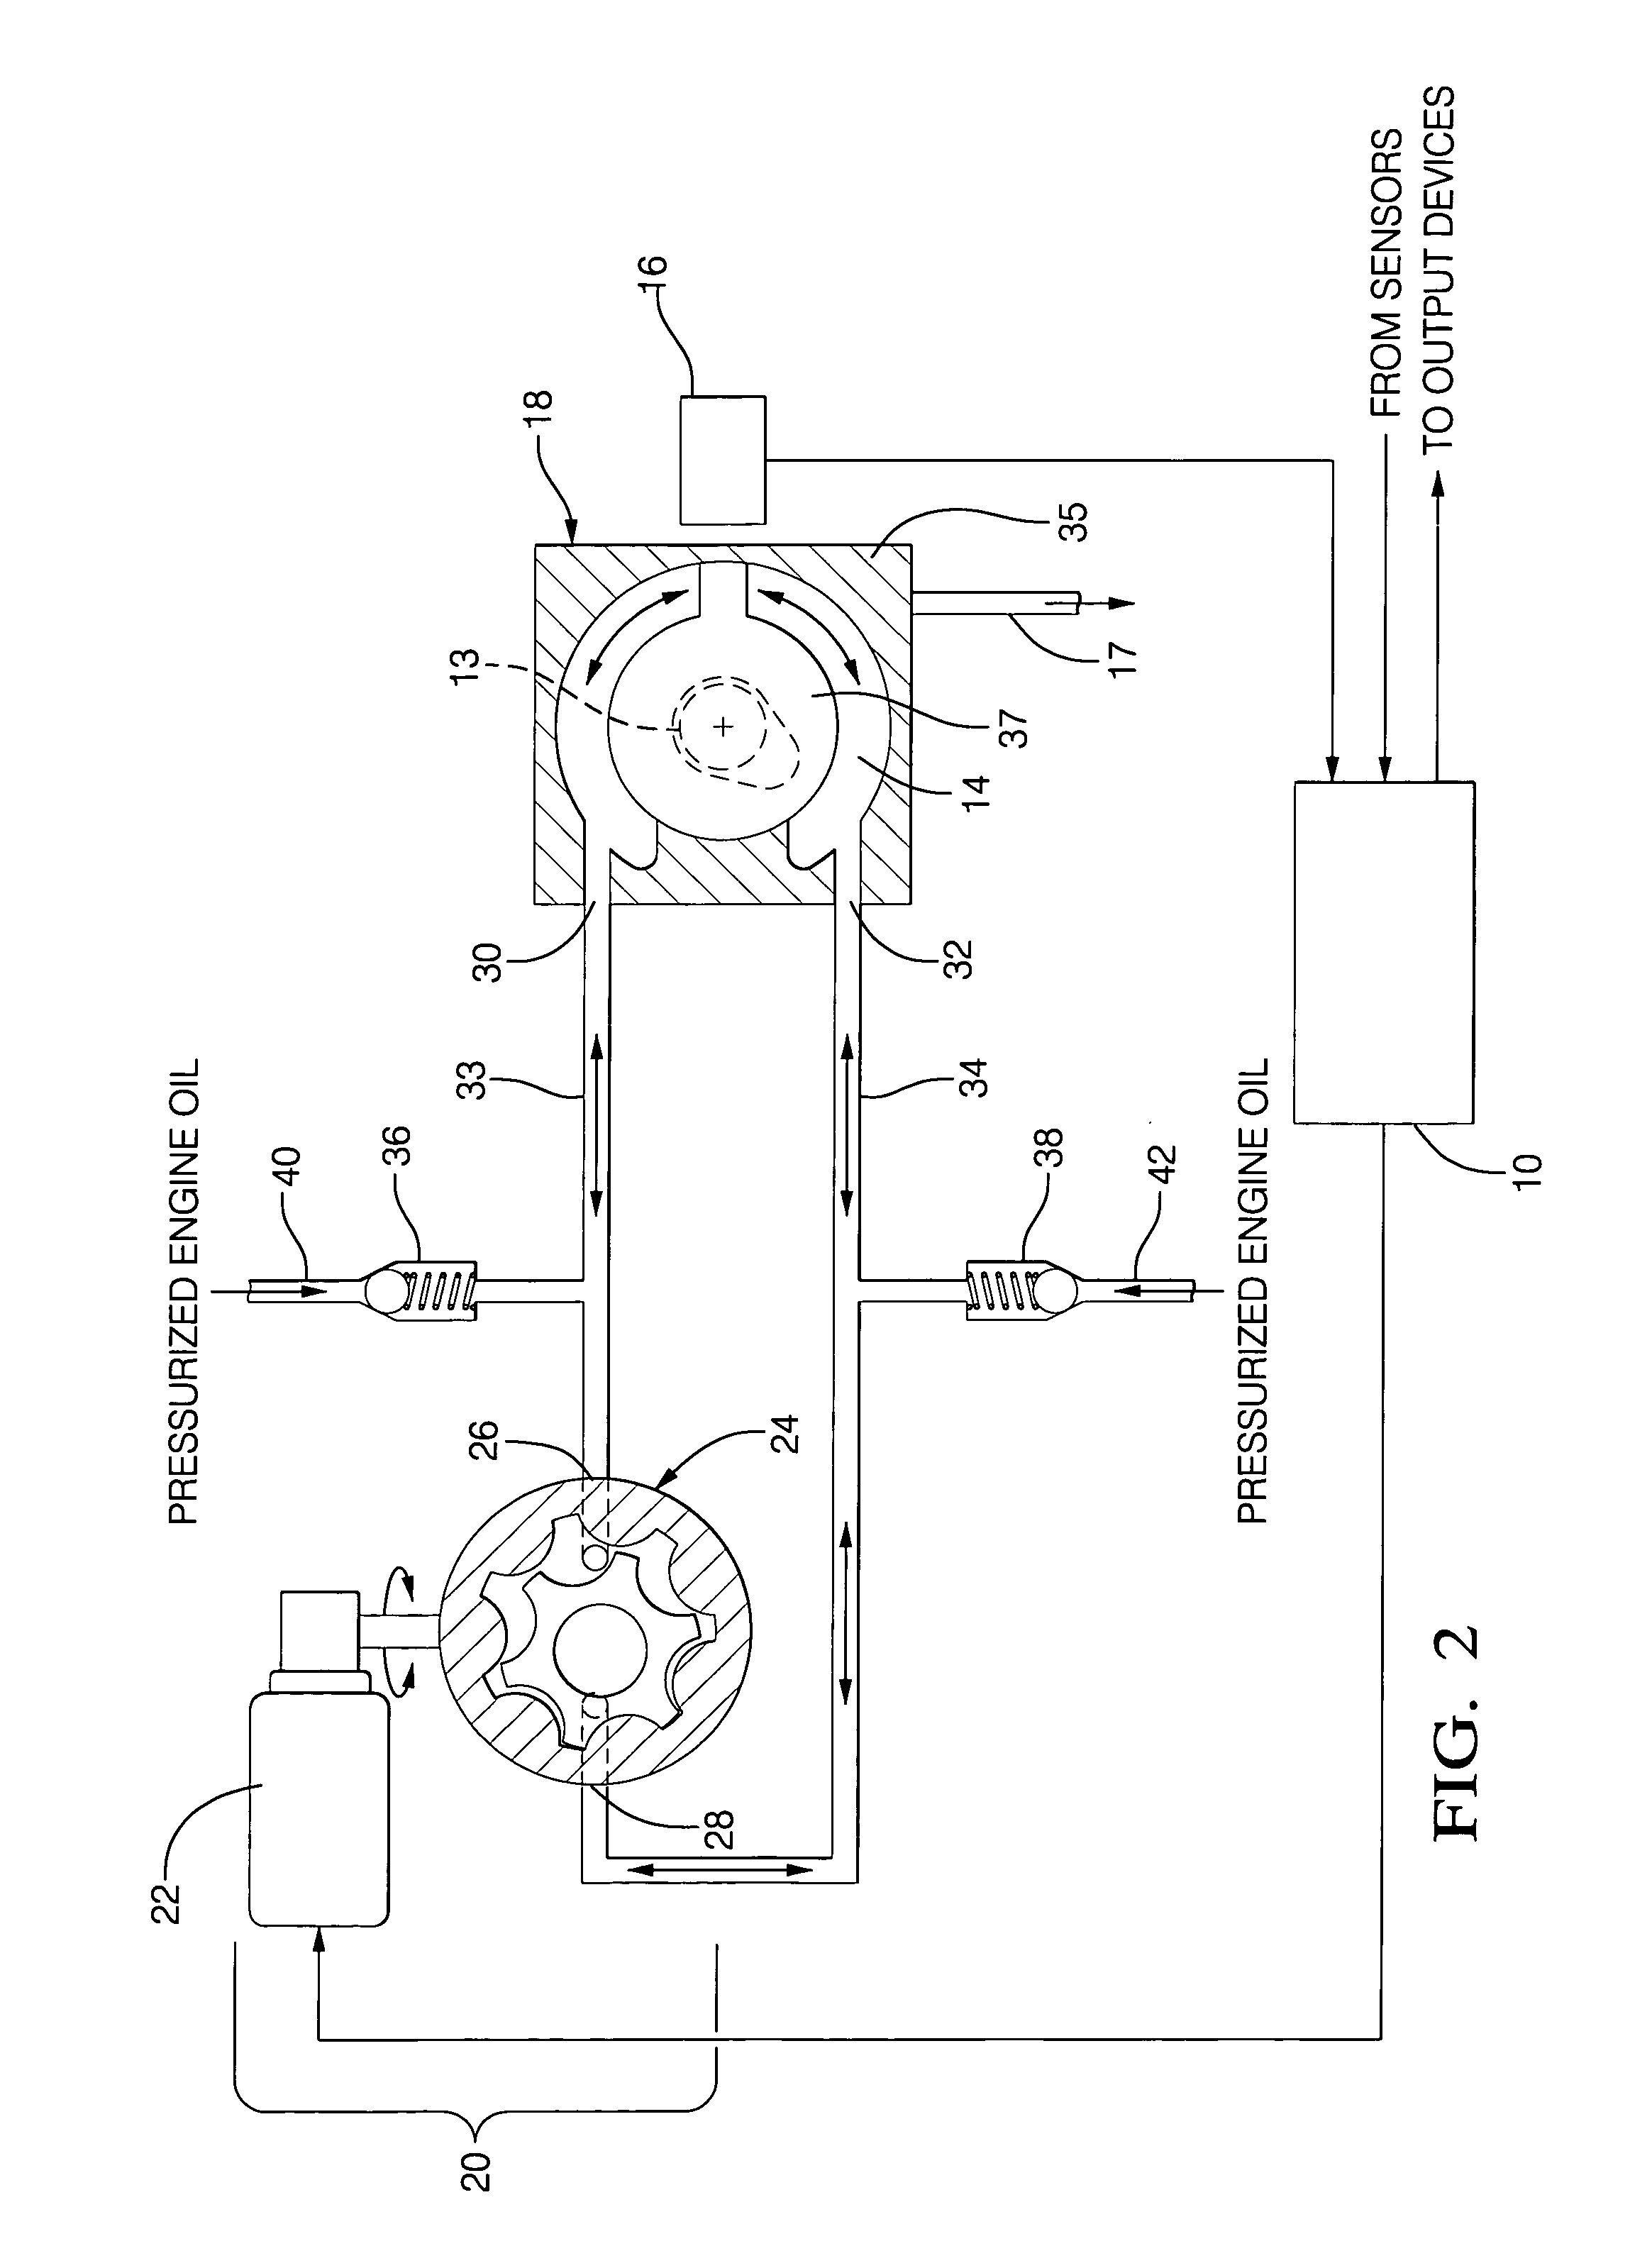 Method and apparatus to control a variable valve control device